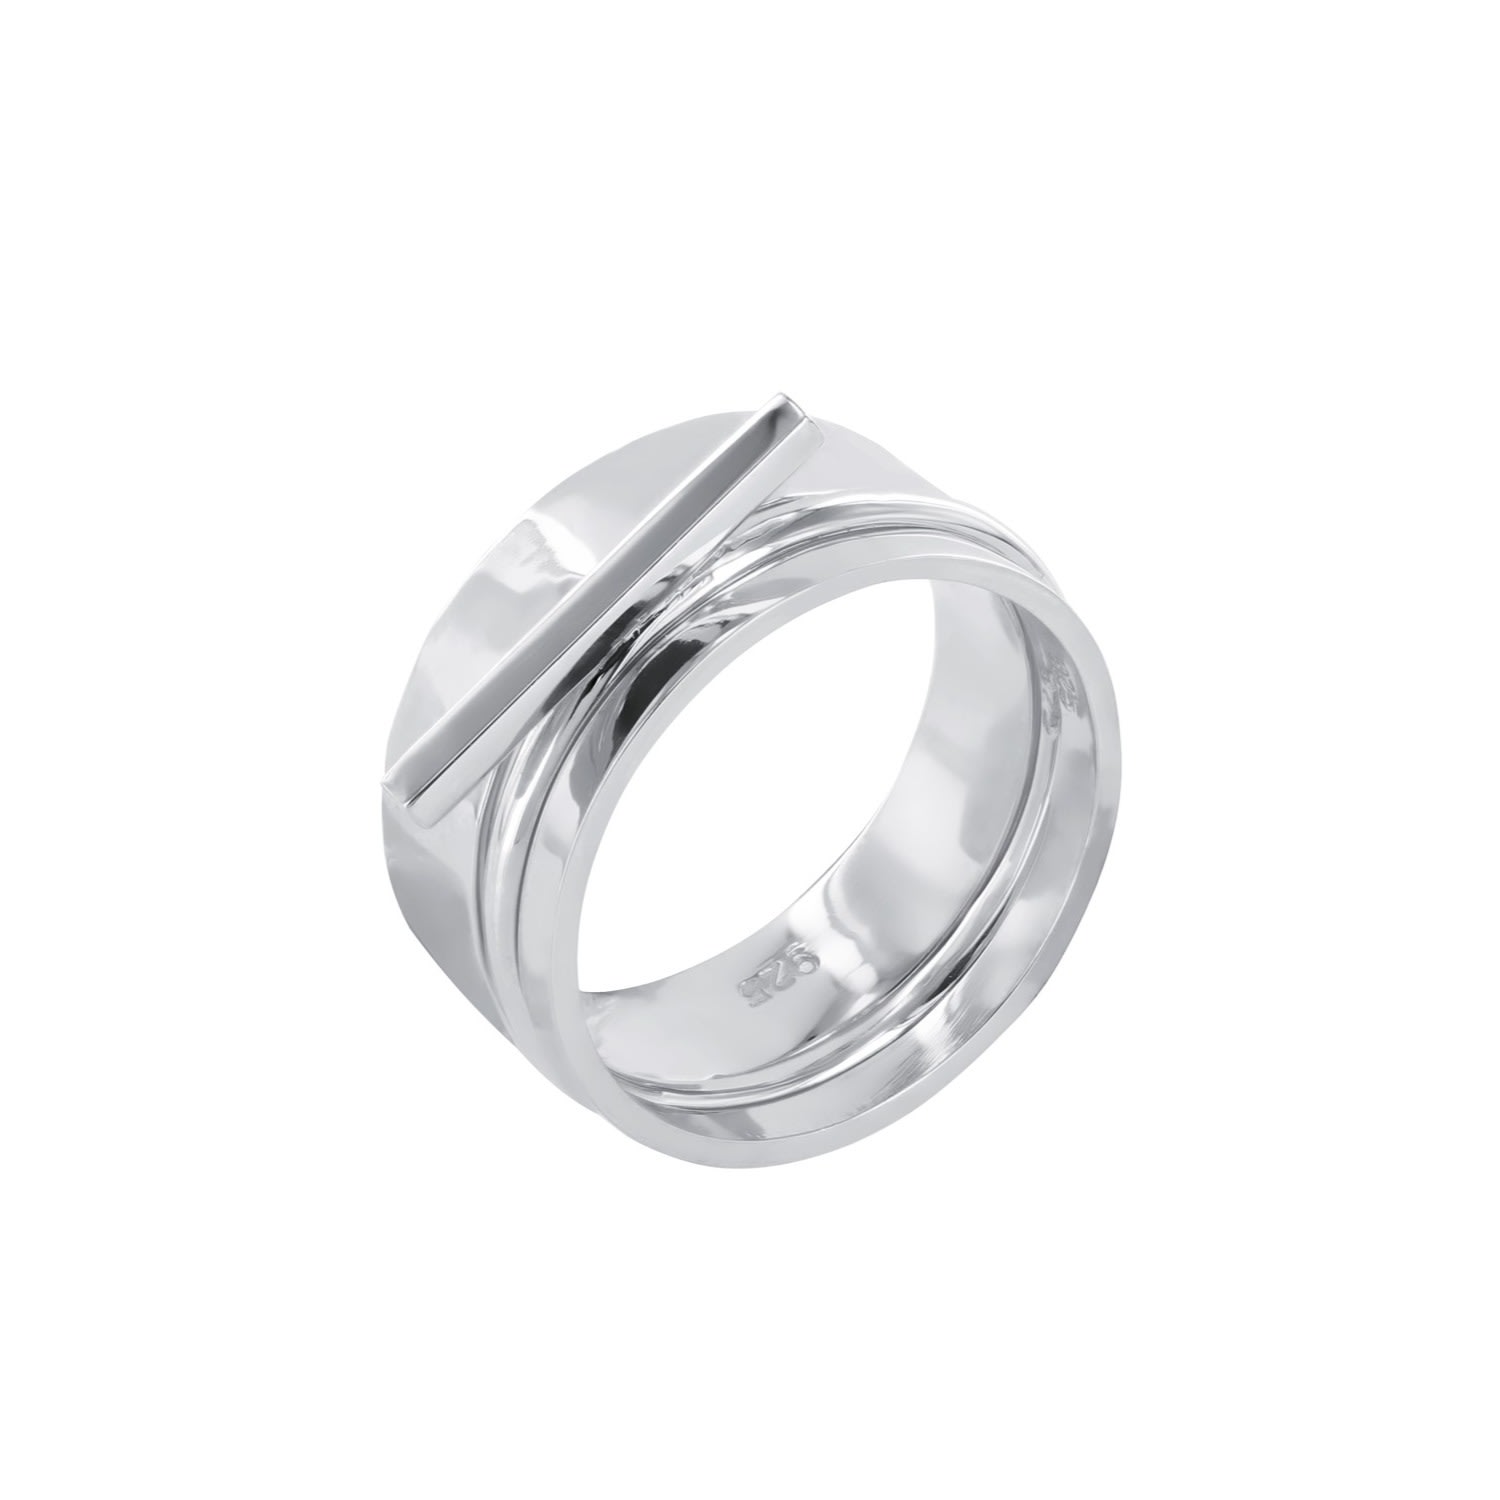 Women’s Bar Style Stacker Ring Set Sterling Silver Wolf and Zephyr